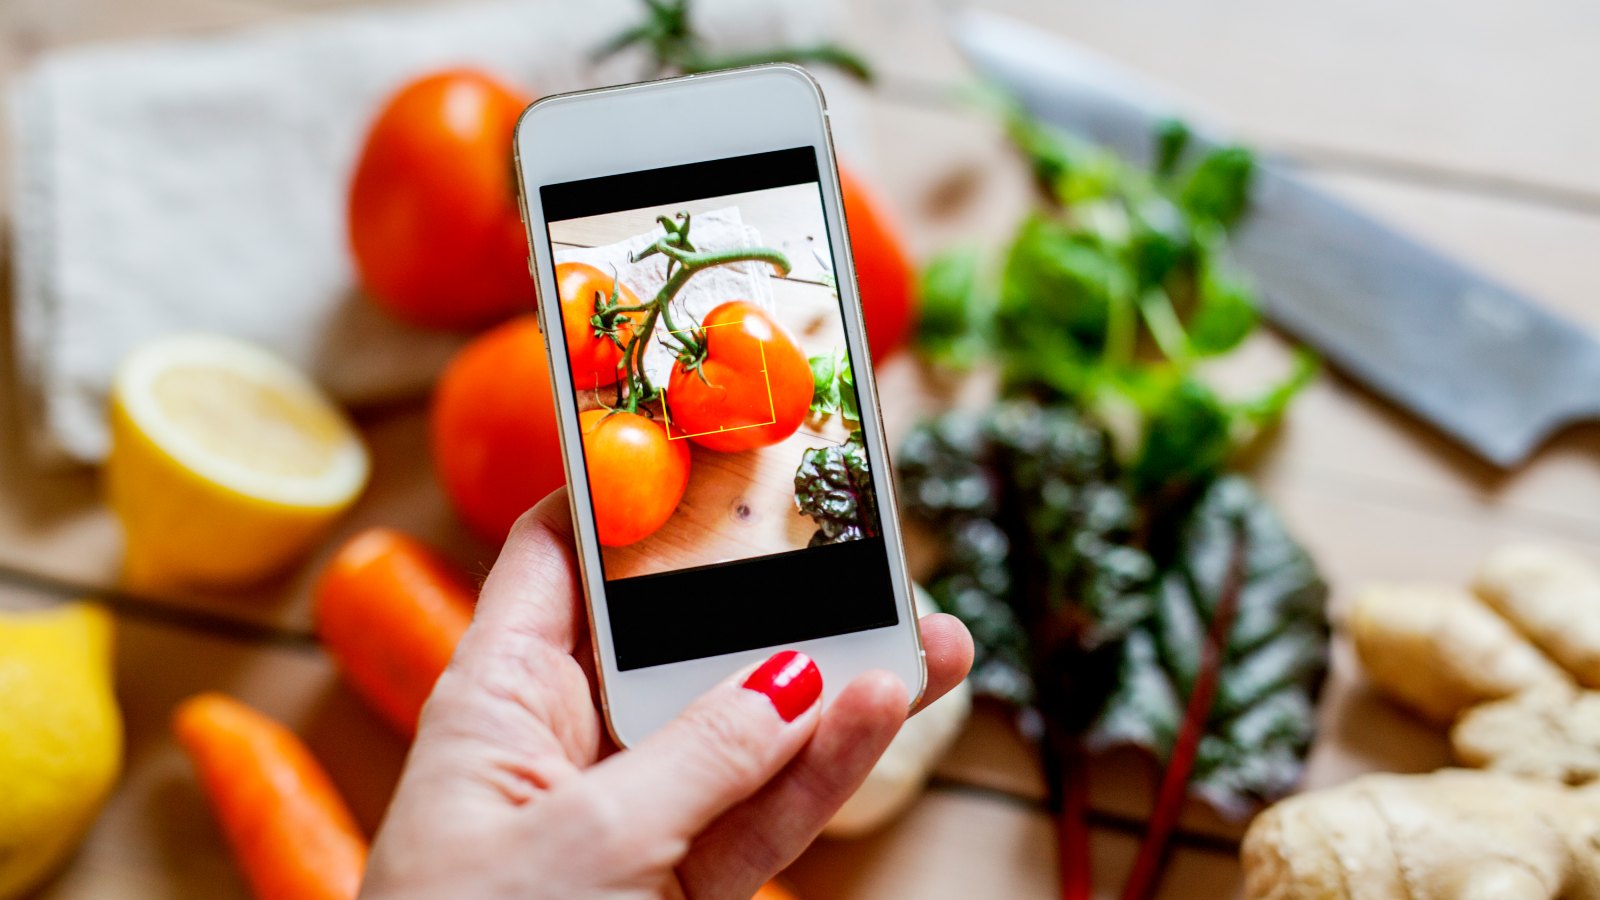 Woman photographing vegetables